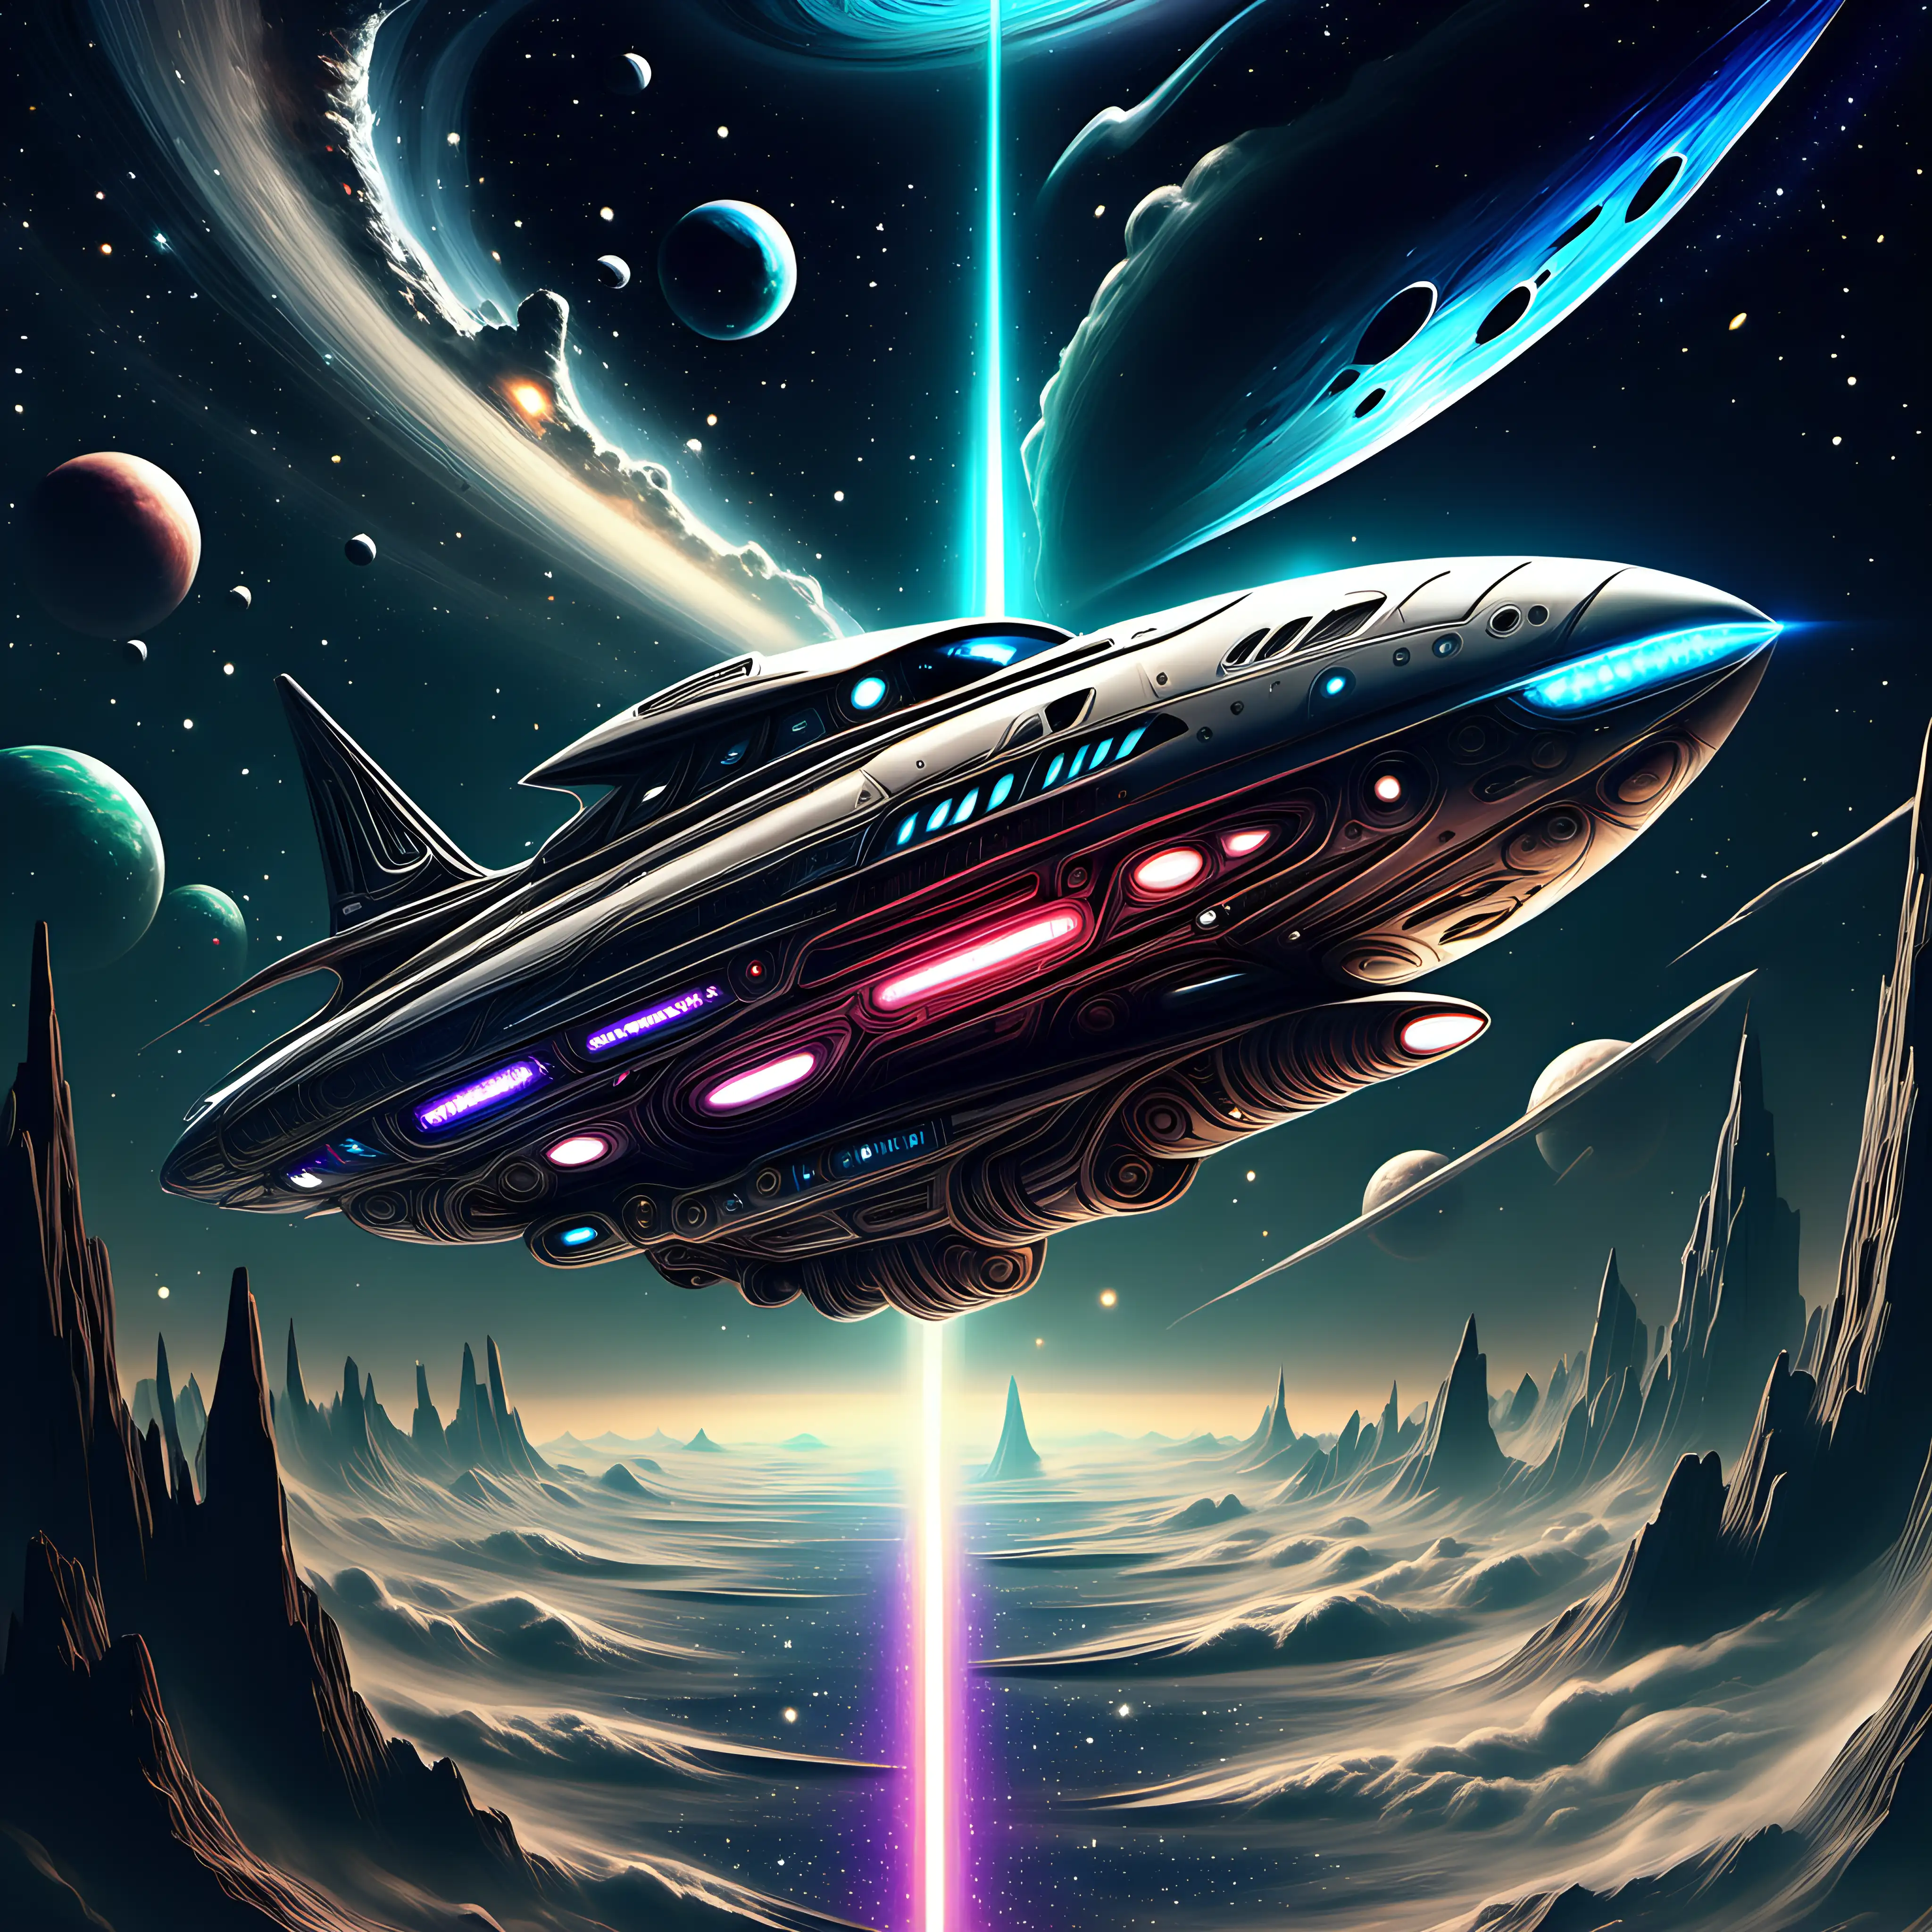 "Craft an AI artwork that transforms the mundane into the extraordinary, taking inspiration from [ blinking stars in tranquility with an alien space ship in supersonic realism] and infusing it with surreal, fantastical elements."HD, High Quality